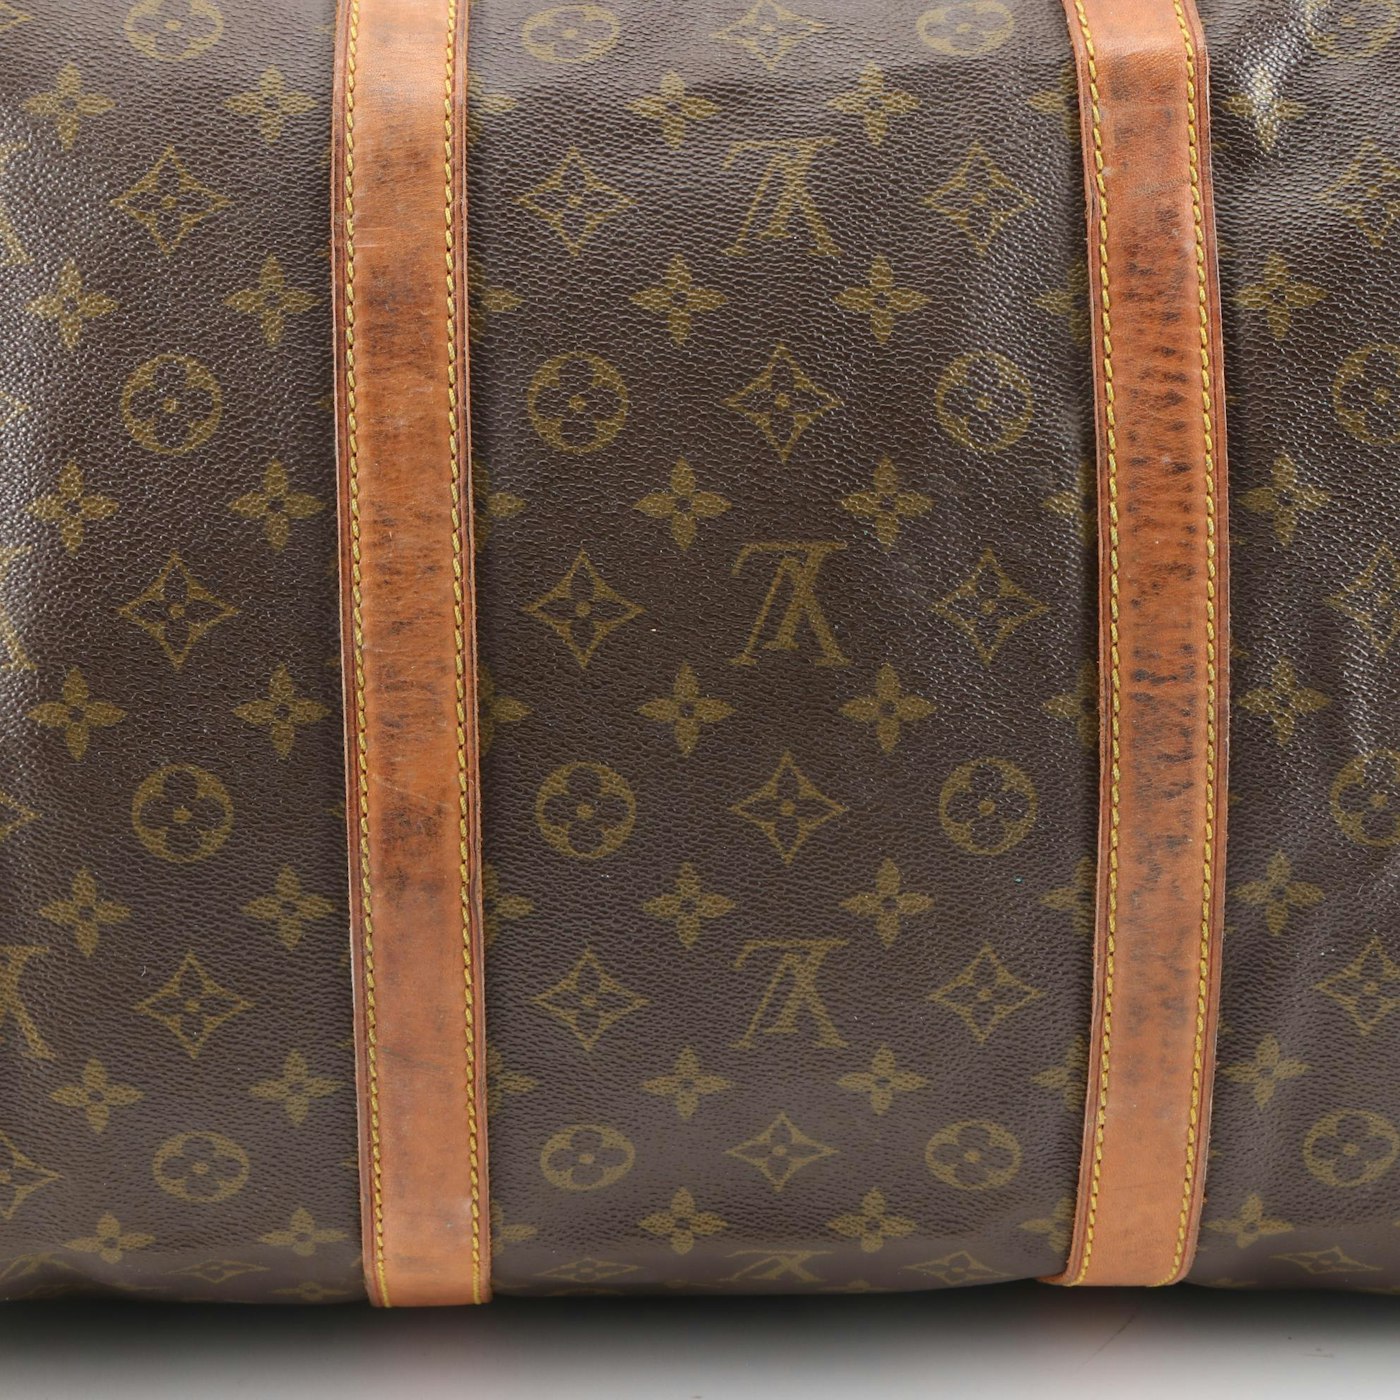 Louis Vuitton Keepall Bandoulière 55 Duffle Bag in Monogram Canvas and Leather | EBTH